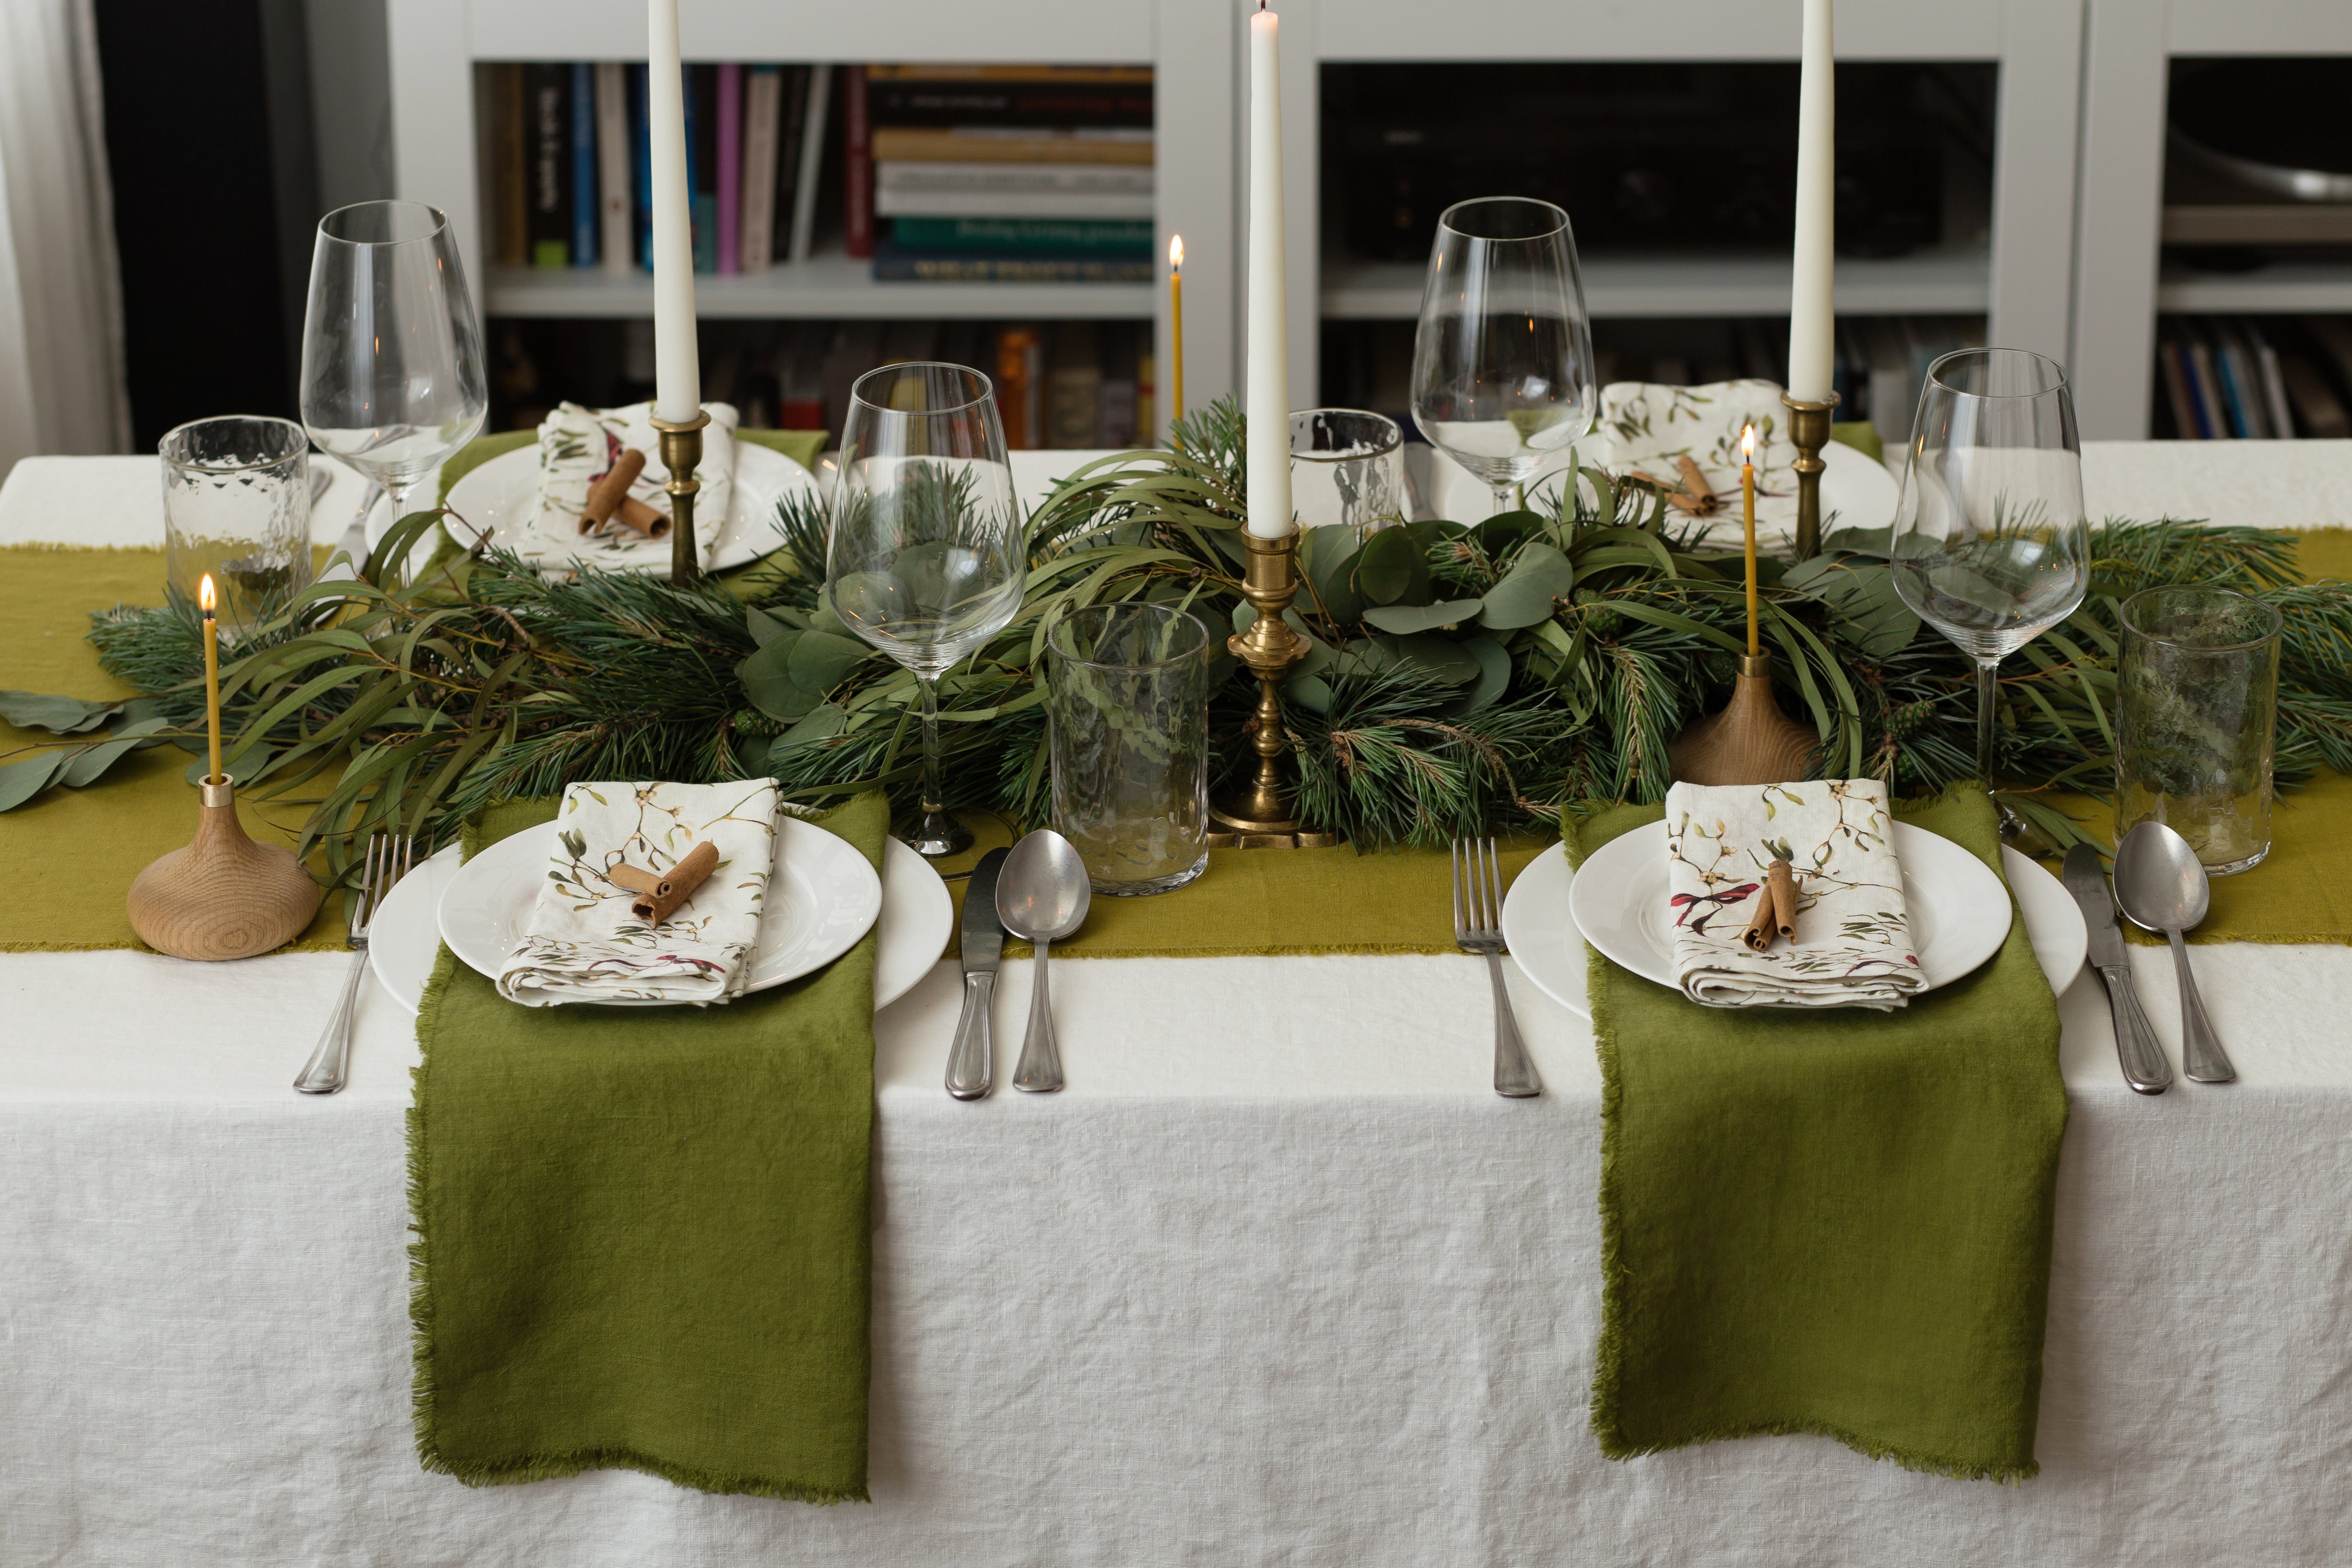 How to Set a Table With Napkins: Your Guide to a Beautiful Table